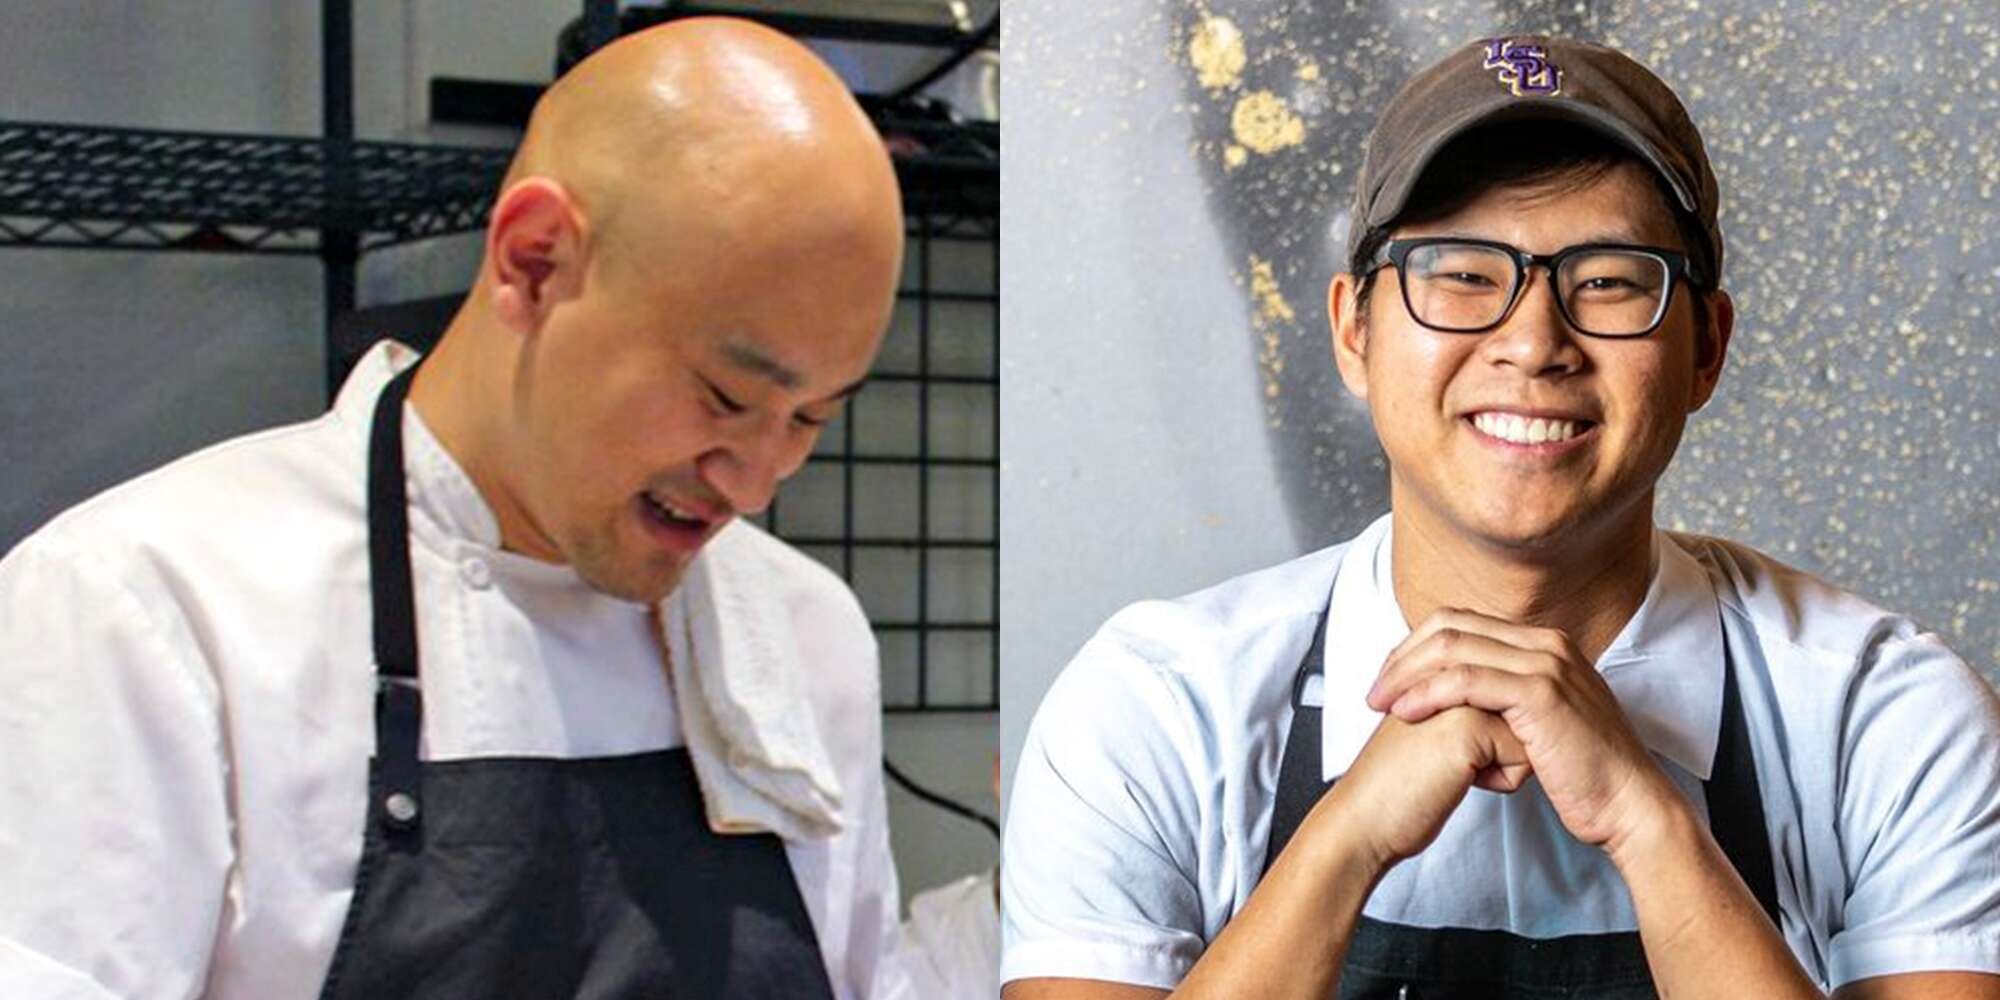 Chefs Around the Country Are Mobilizing to Fight Anti-Asian Violence